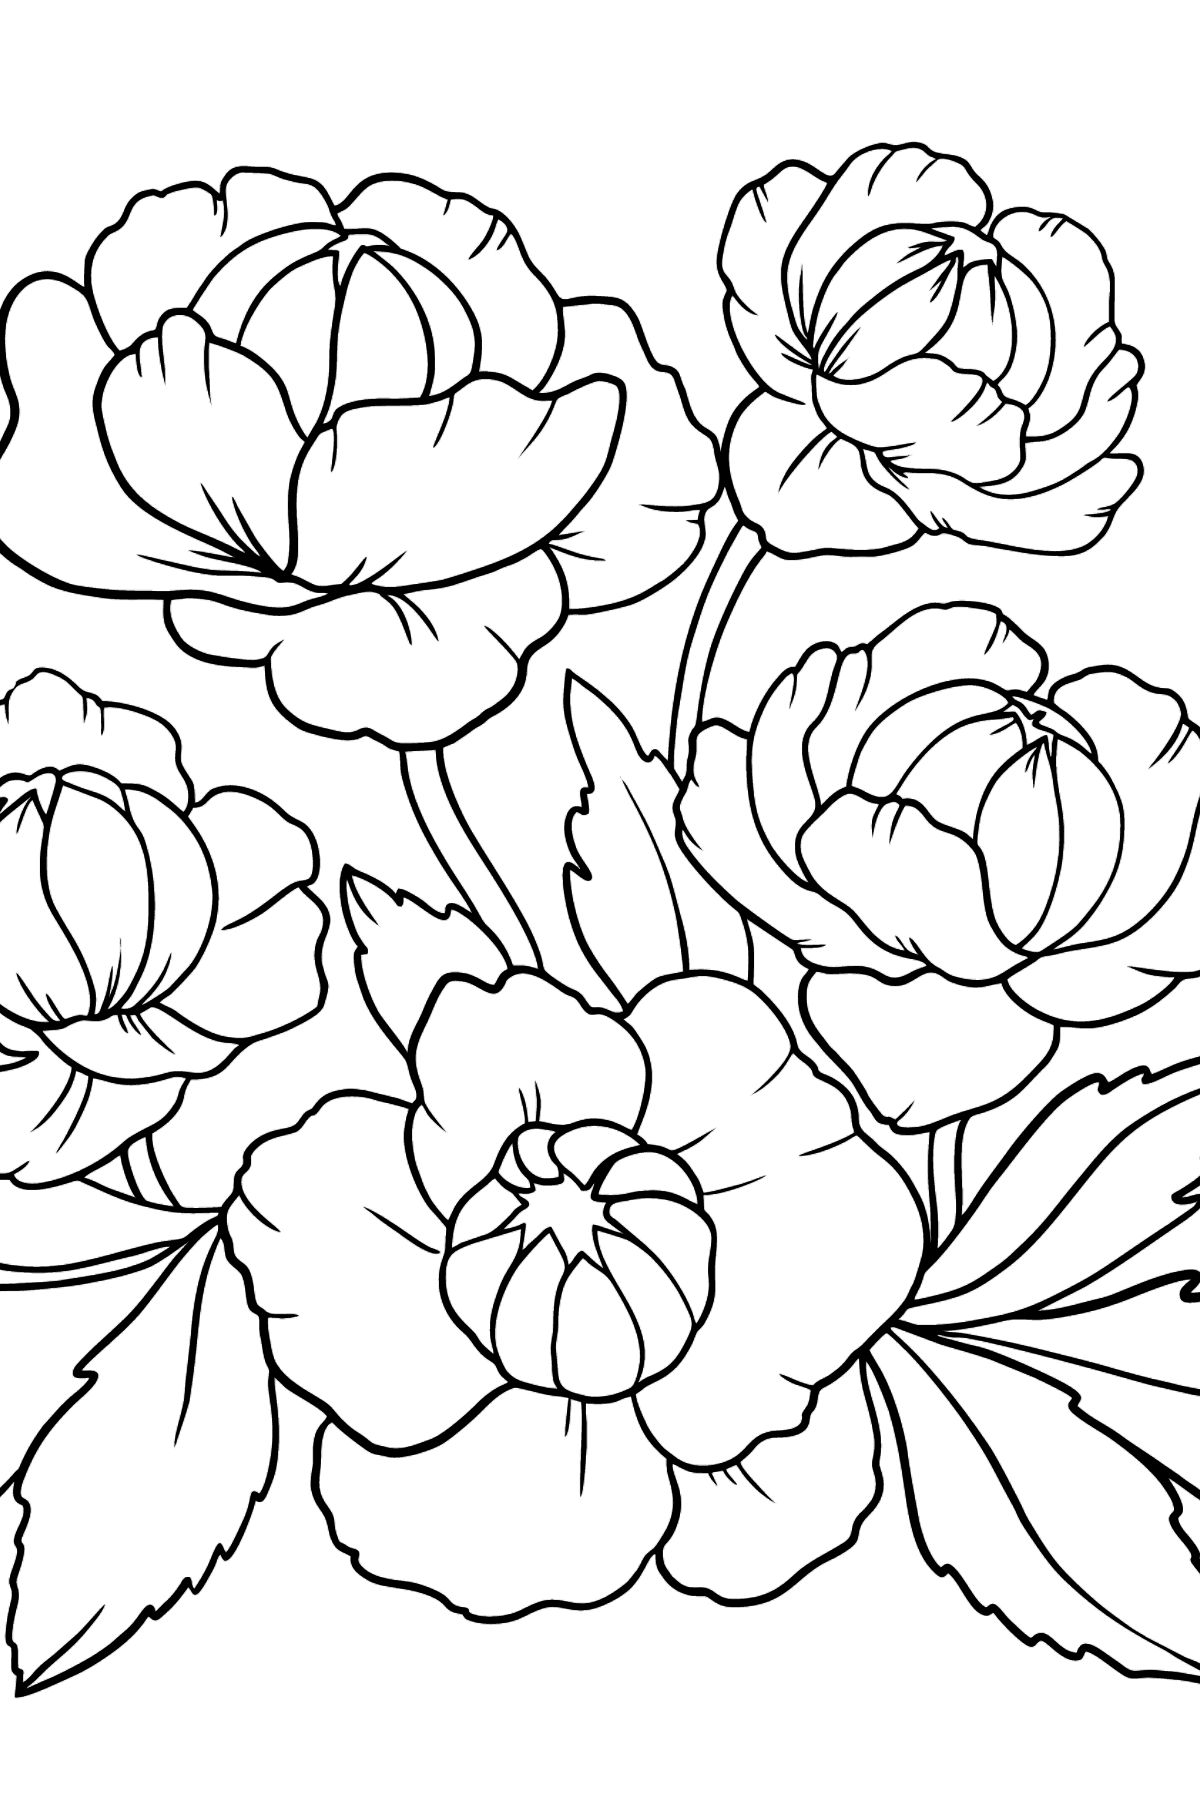 Coloring Page Pink Globeflower - Coloring Pages for Kids